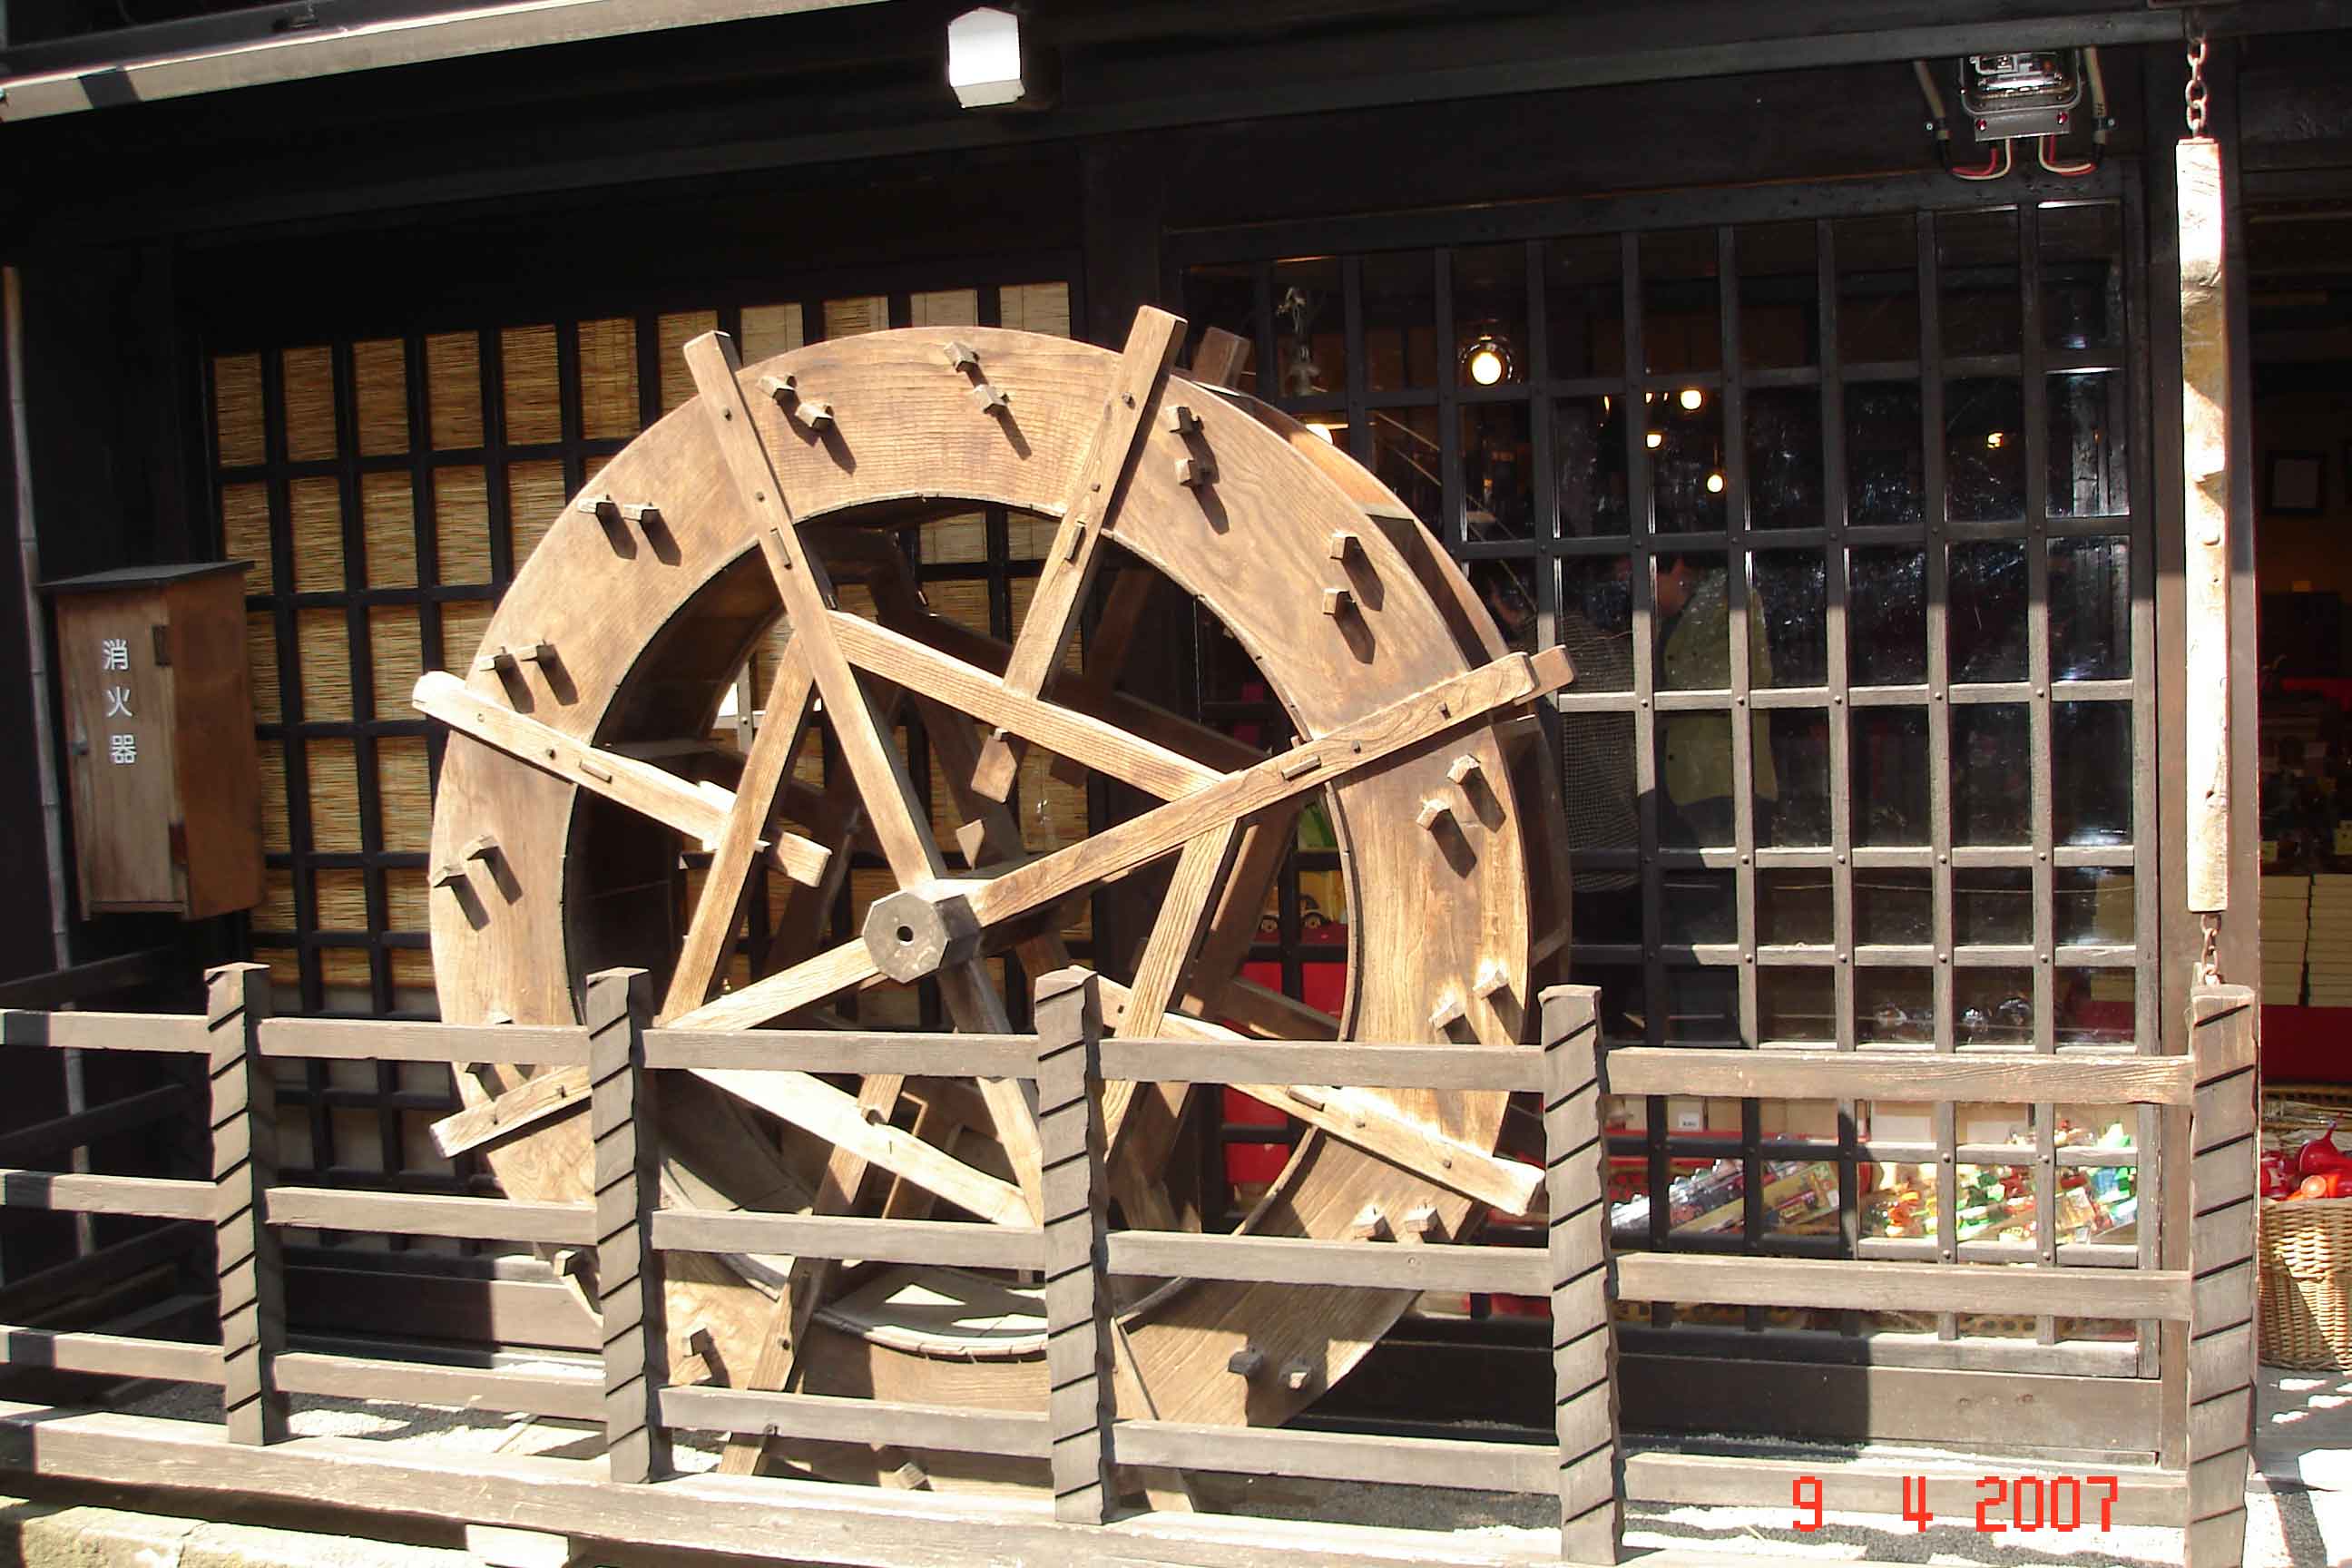 Fascinating traditional old water wheel outside a Craft Shop, Takayama